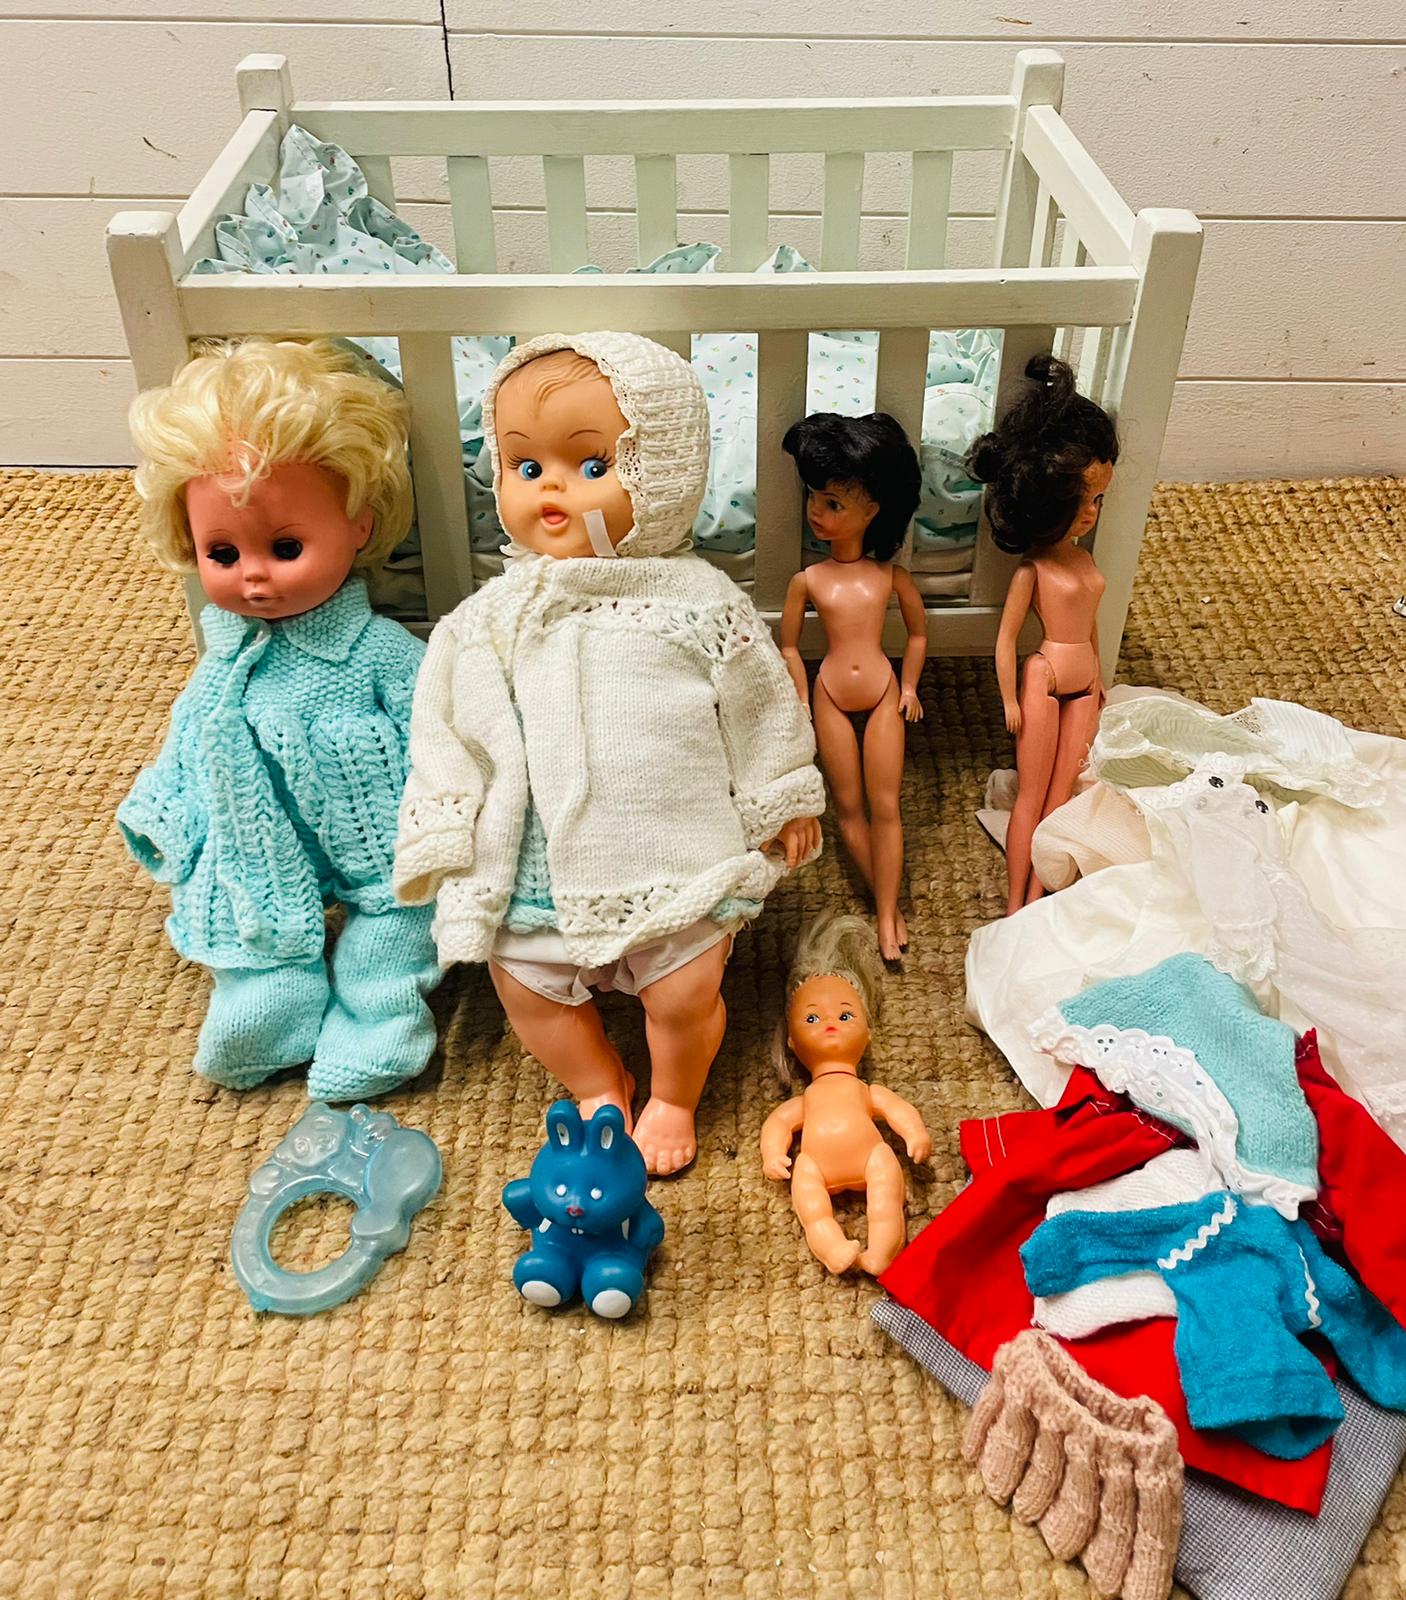 A vintage white wooden children's toy doll cot with dolls, bedding and toys